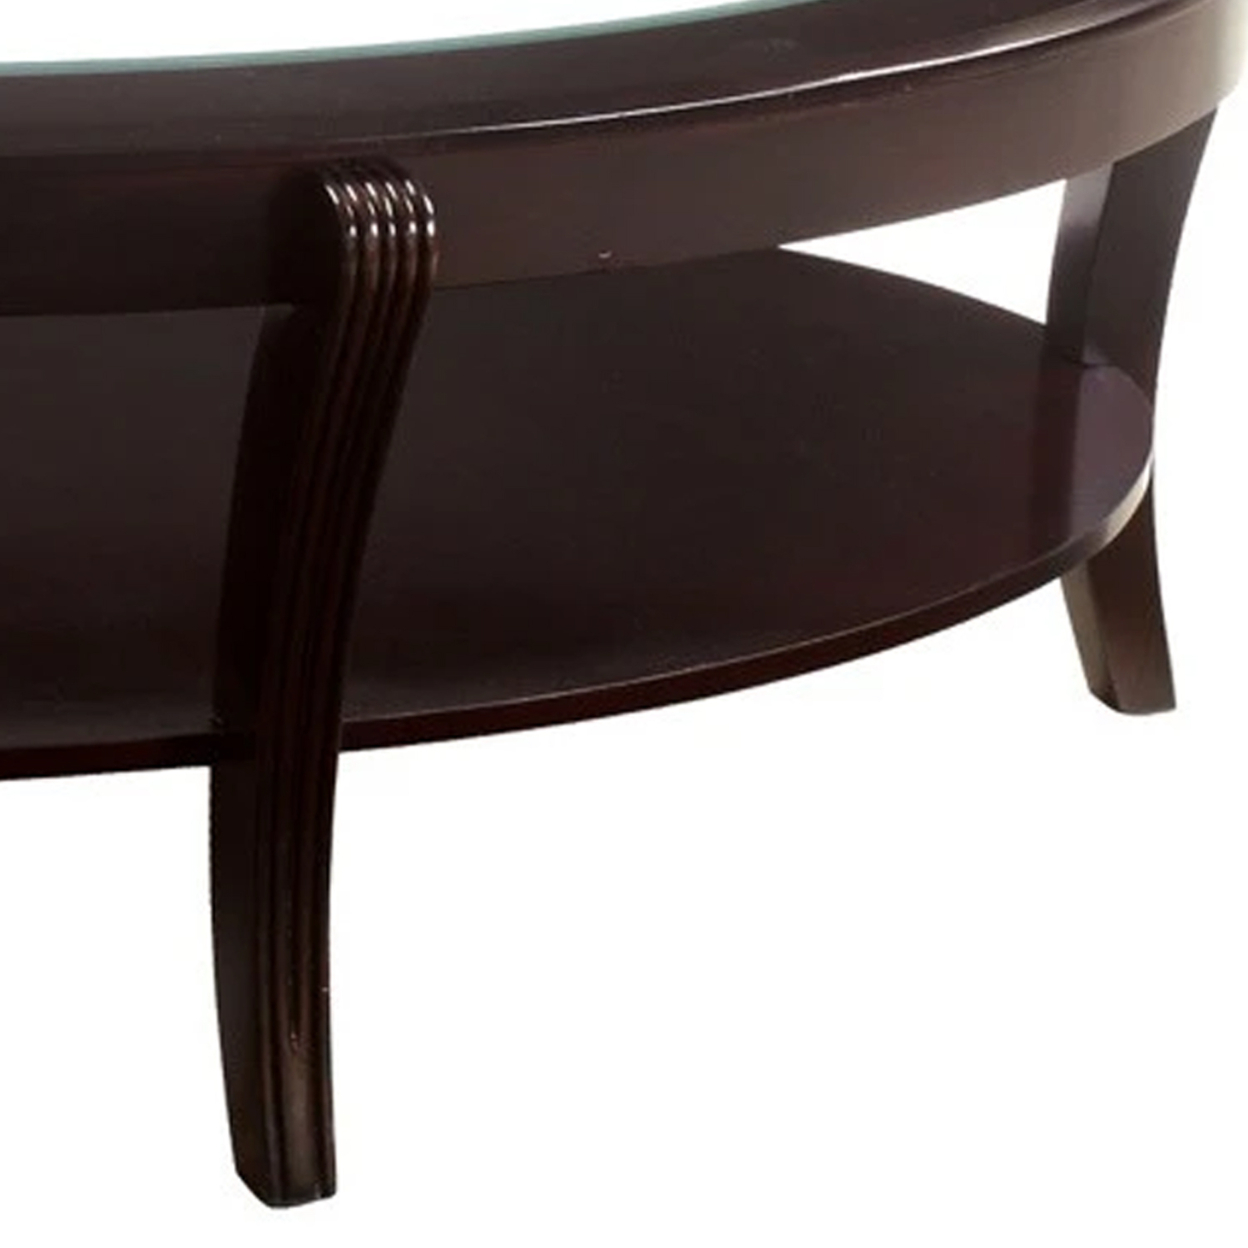 Oval Wooden Cocktail Table With Glass Insert And Open Shelf, Espresso Brown- Saltoro Sherpi